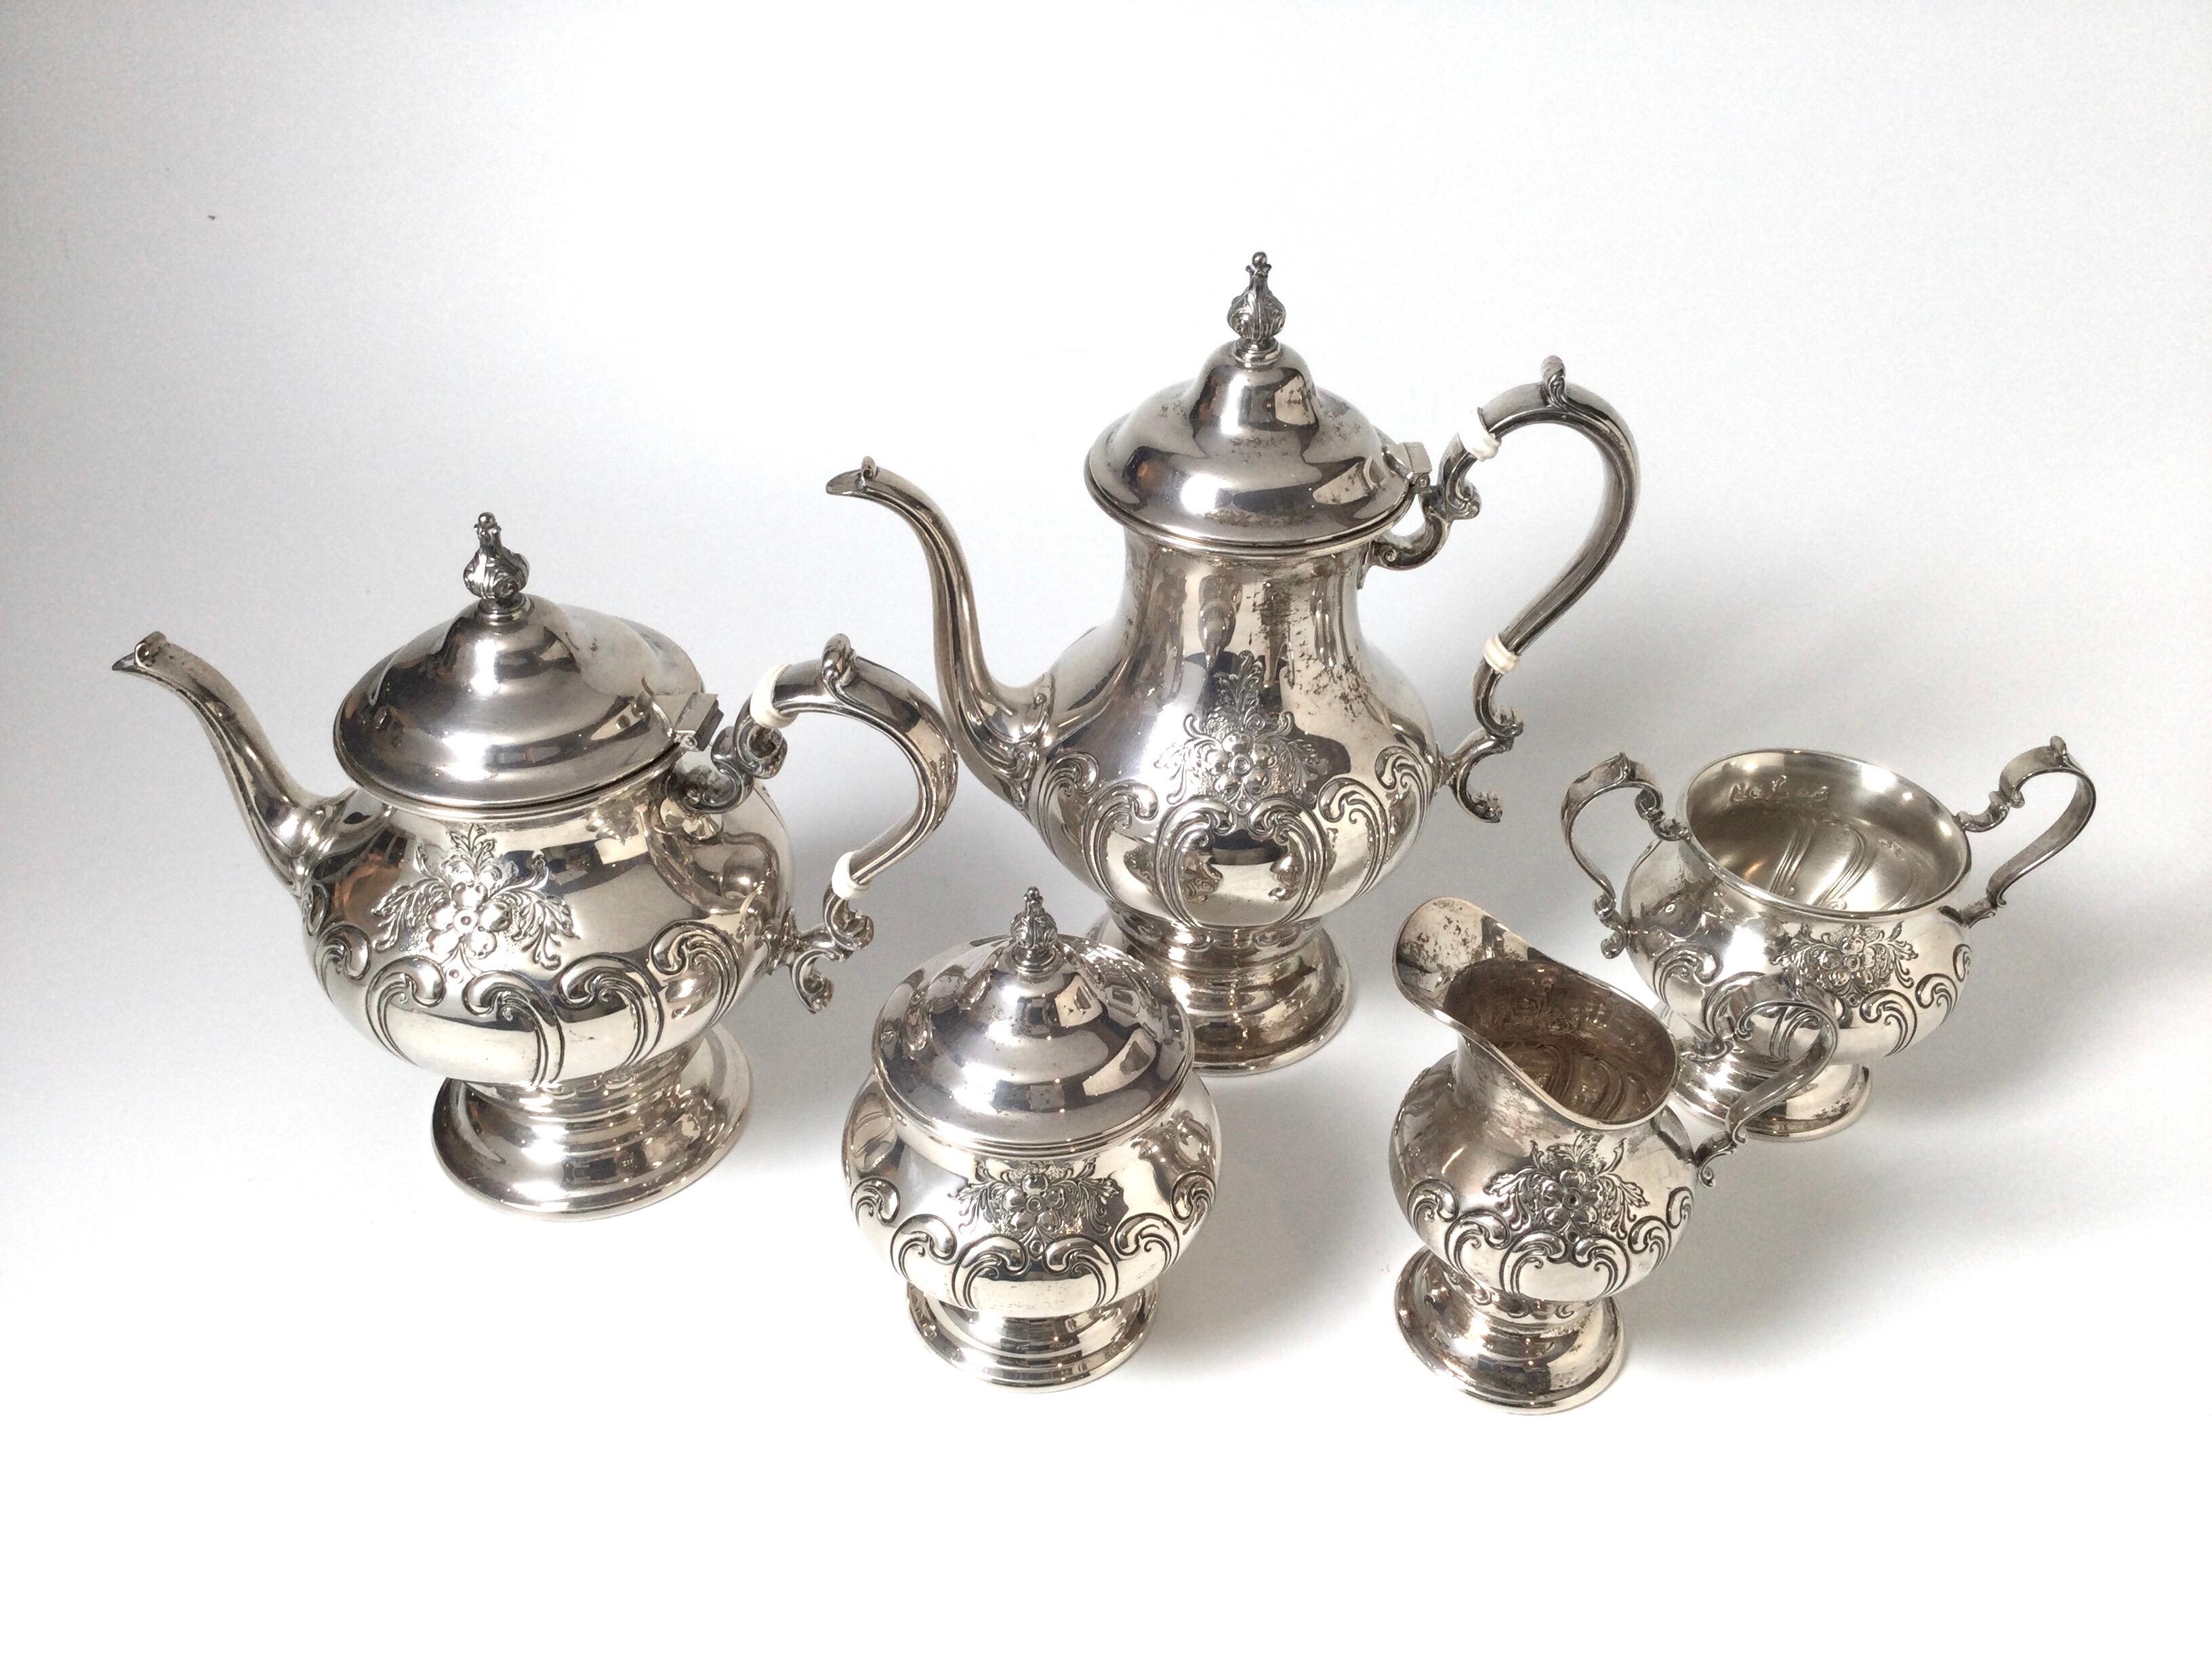 Sterling silver tea service with coffee pot, 11 inches, tea pot 9 inches, waste bowl 5.5 inches, covered sugar 6.25 inches, and creamer, 5.5 inches. The set with an all over repoussé decoration. The pattern is Chantilly mid 20th Century, This set is